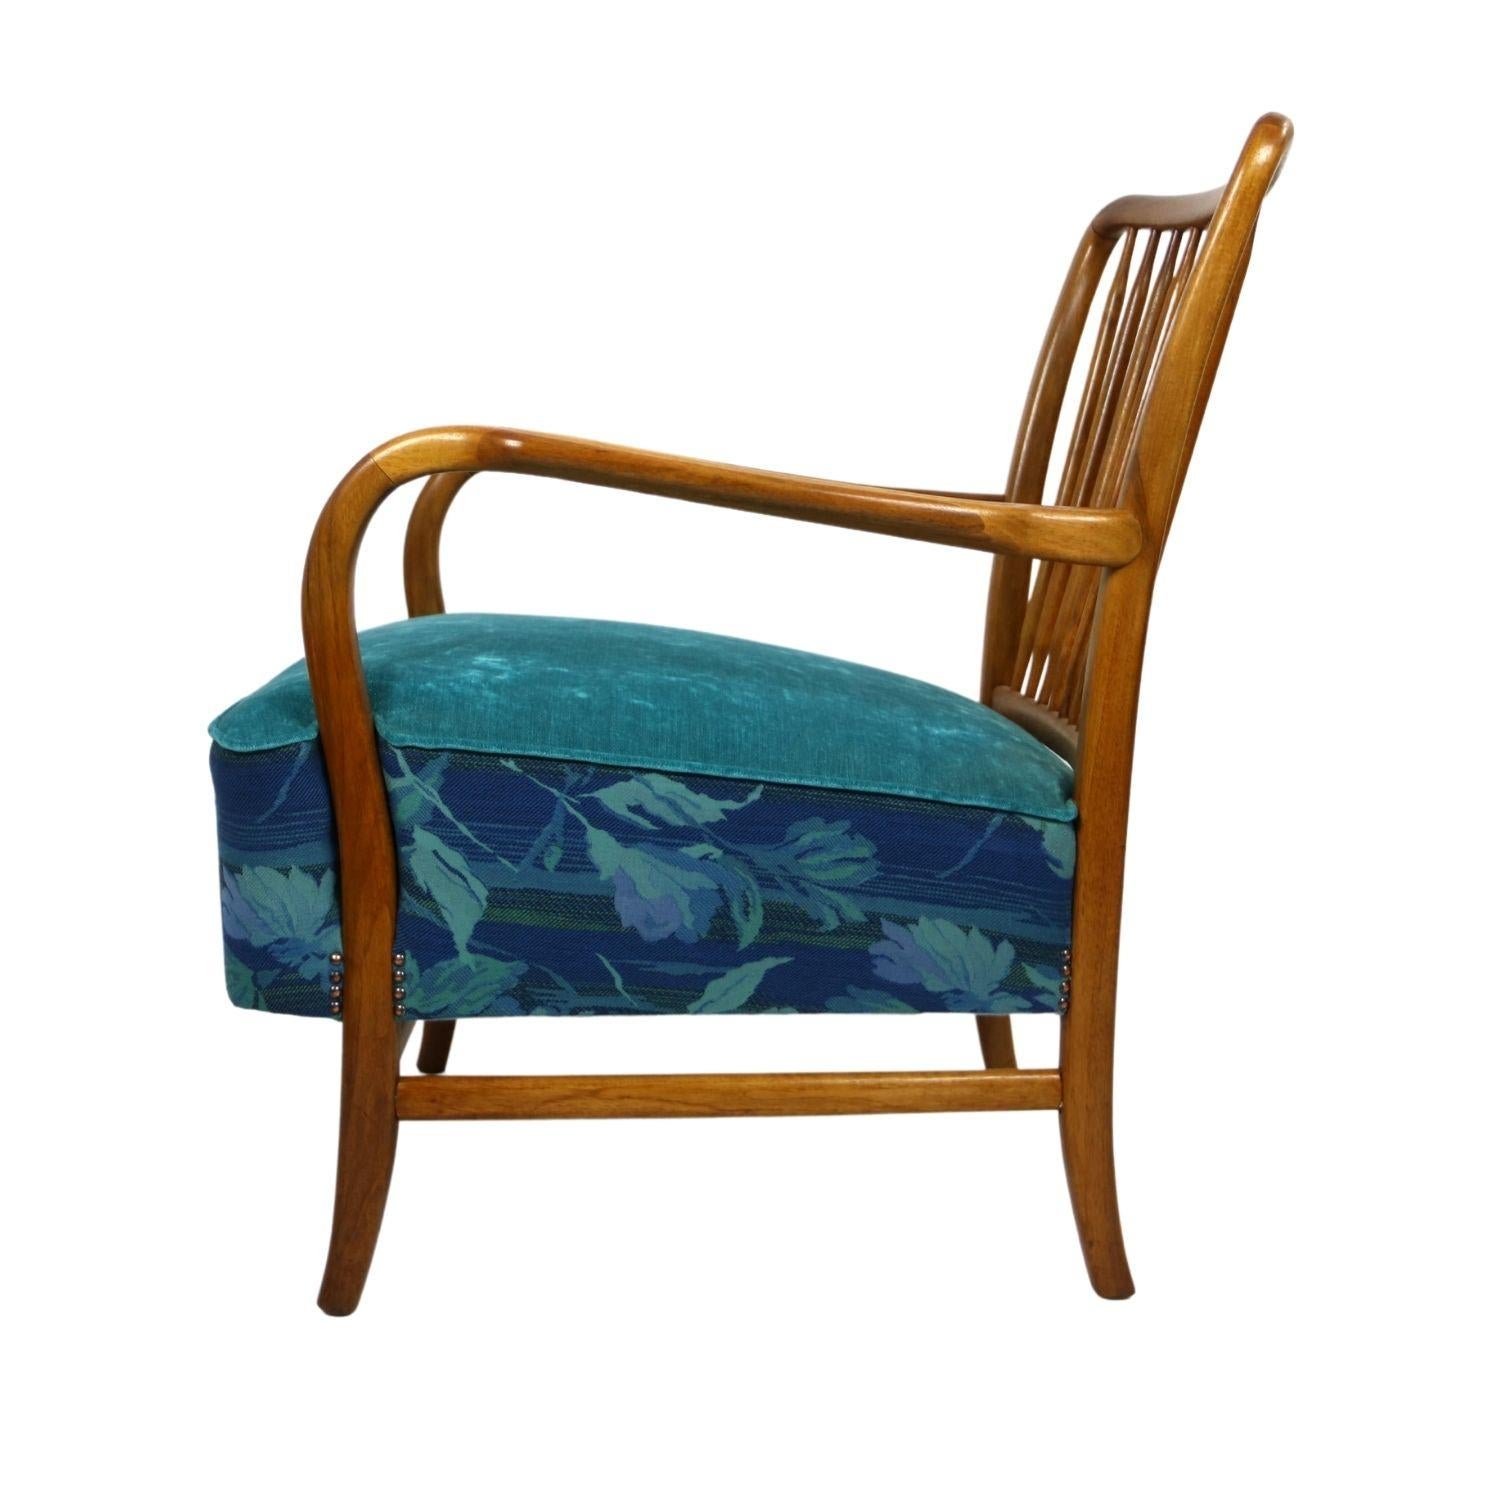 The latest piece of our studio is an famous rare Art Deco armchair with curved arms around 1935, designed by Gyula Kaesz. We combined with turquoise velvet and deep blue patterned recycled fabric. During the renovation, the patina of the wood was